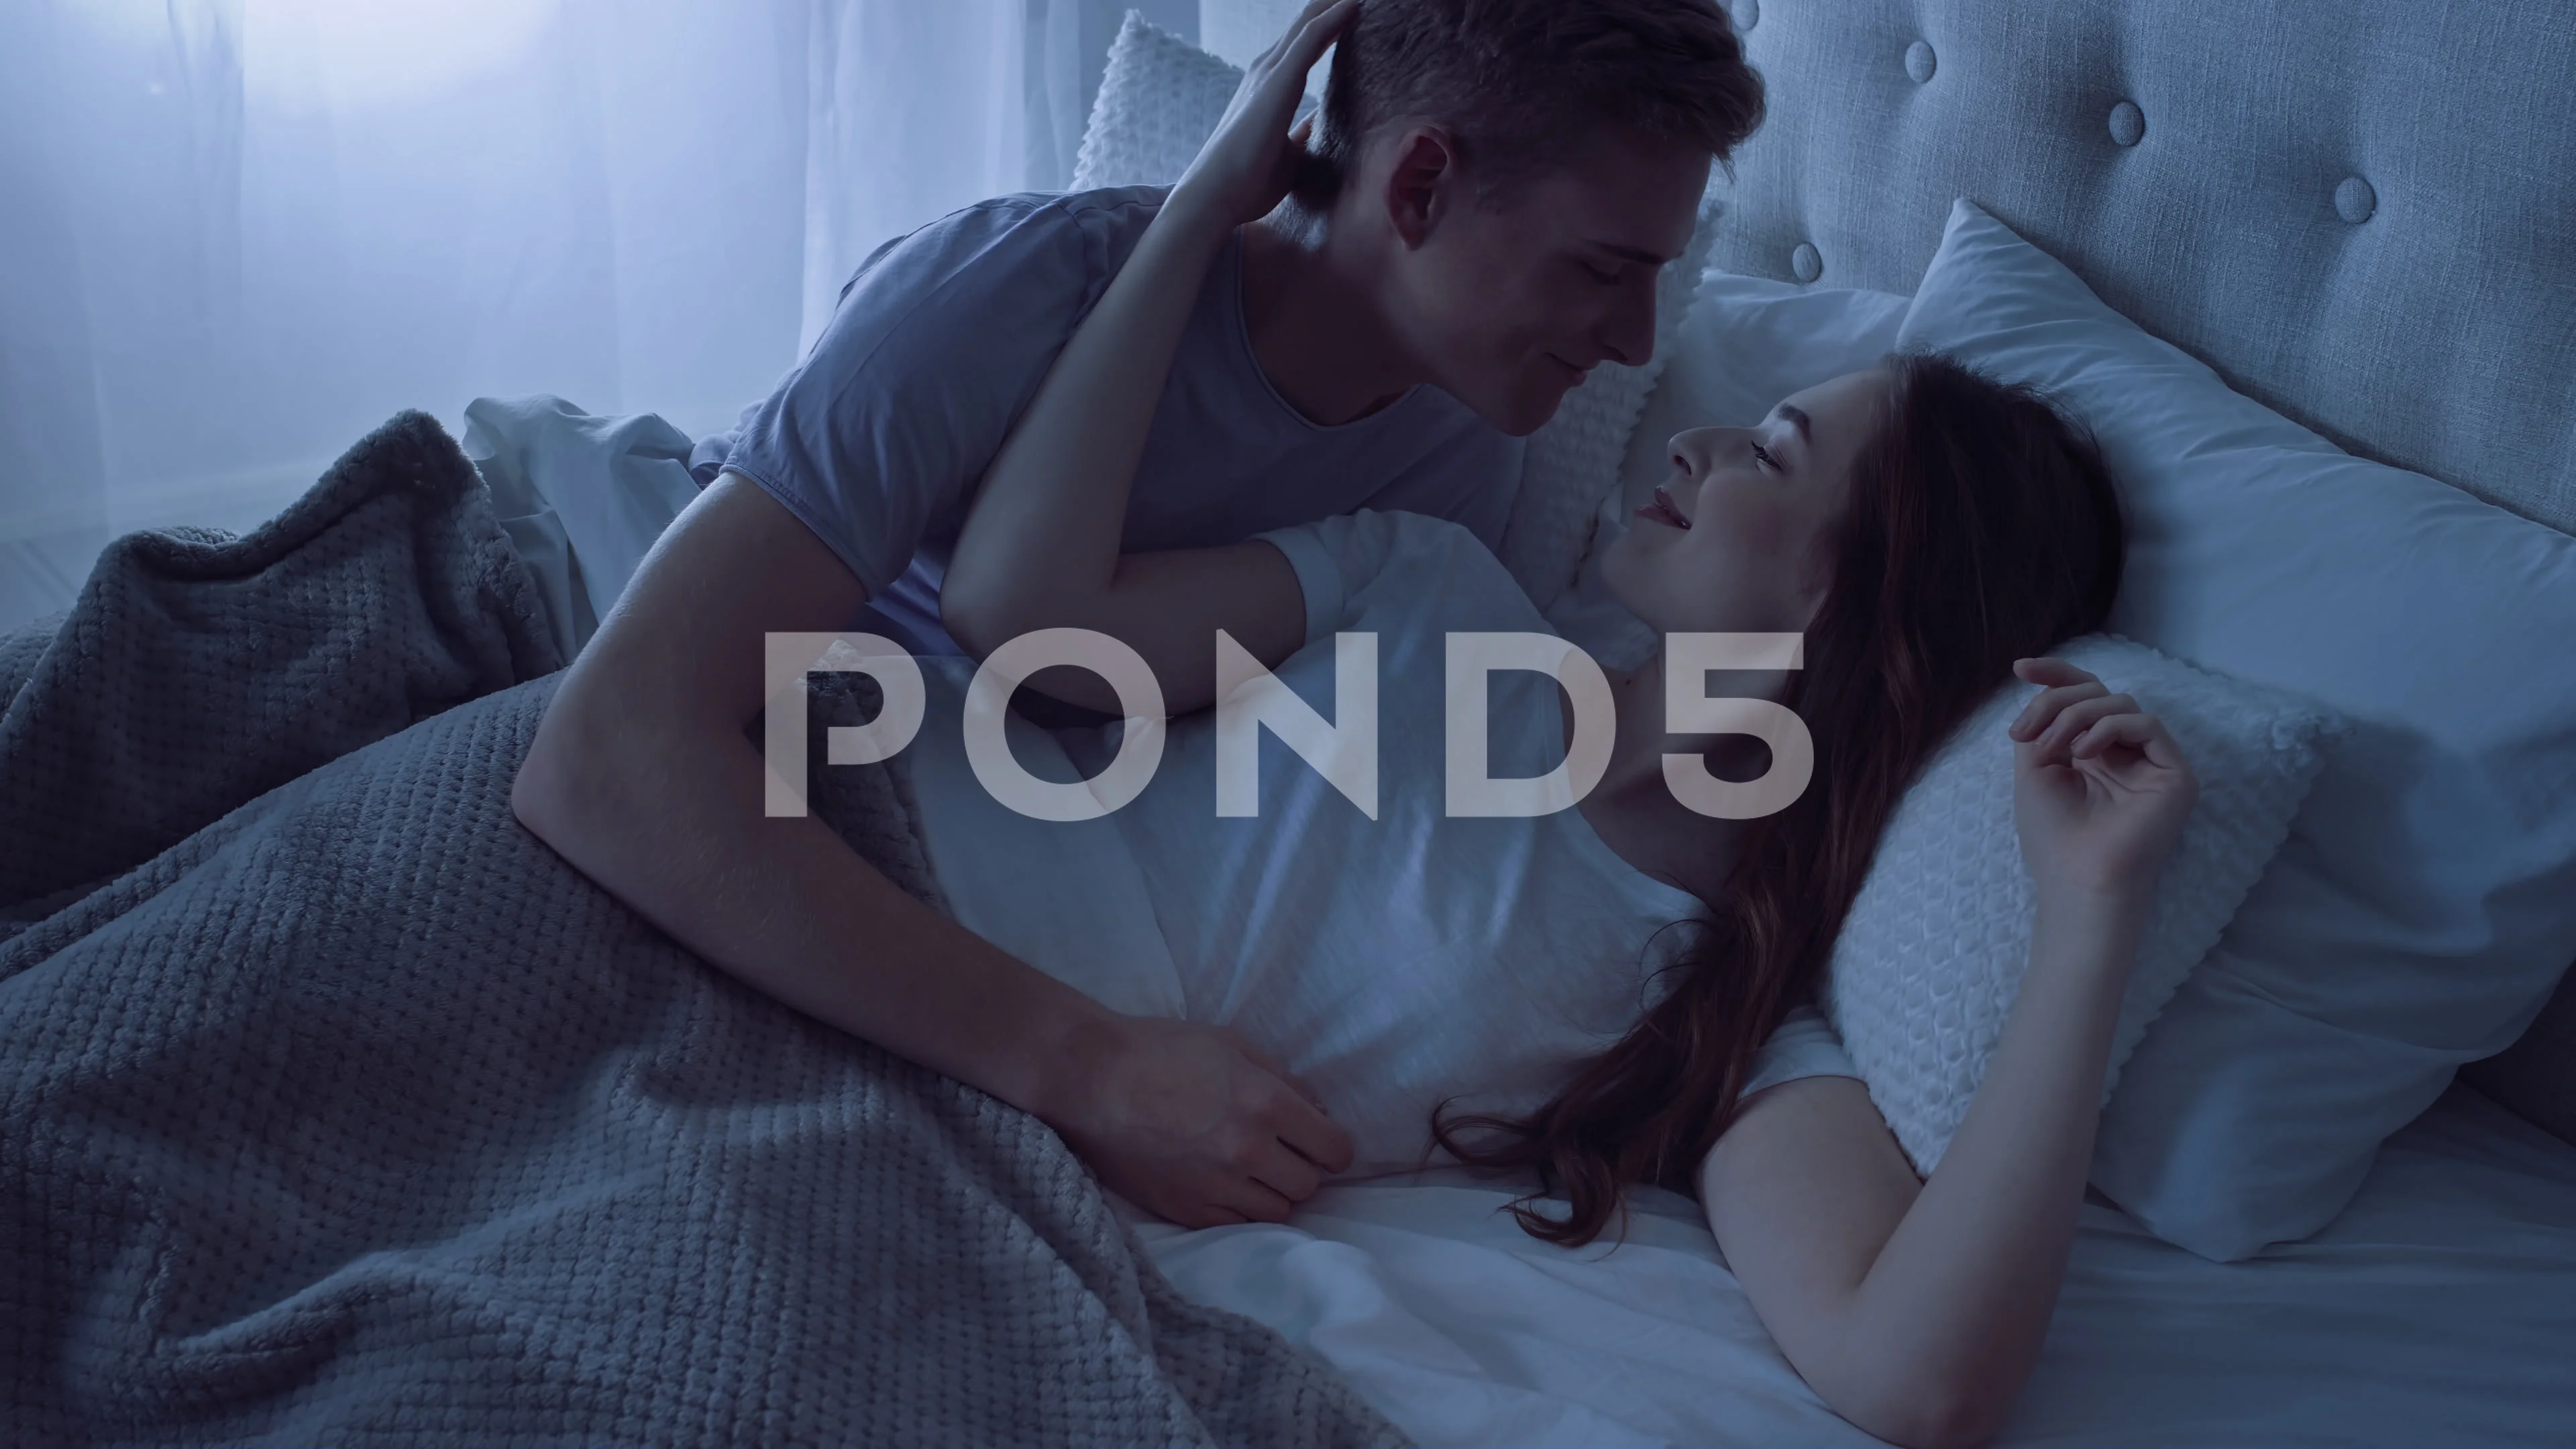 Pictures Of Couples Cuddling In Bed kill uncensored